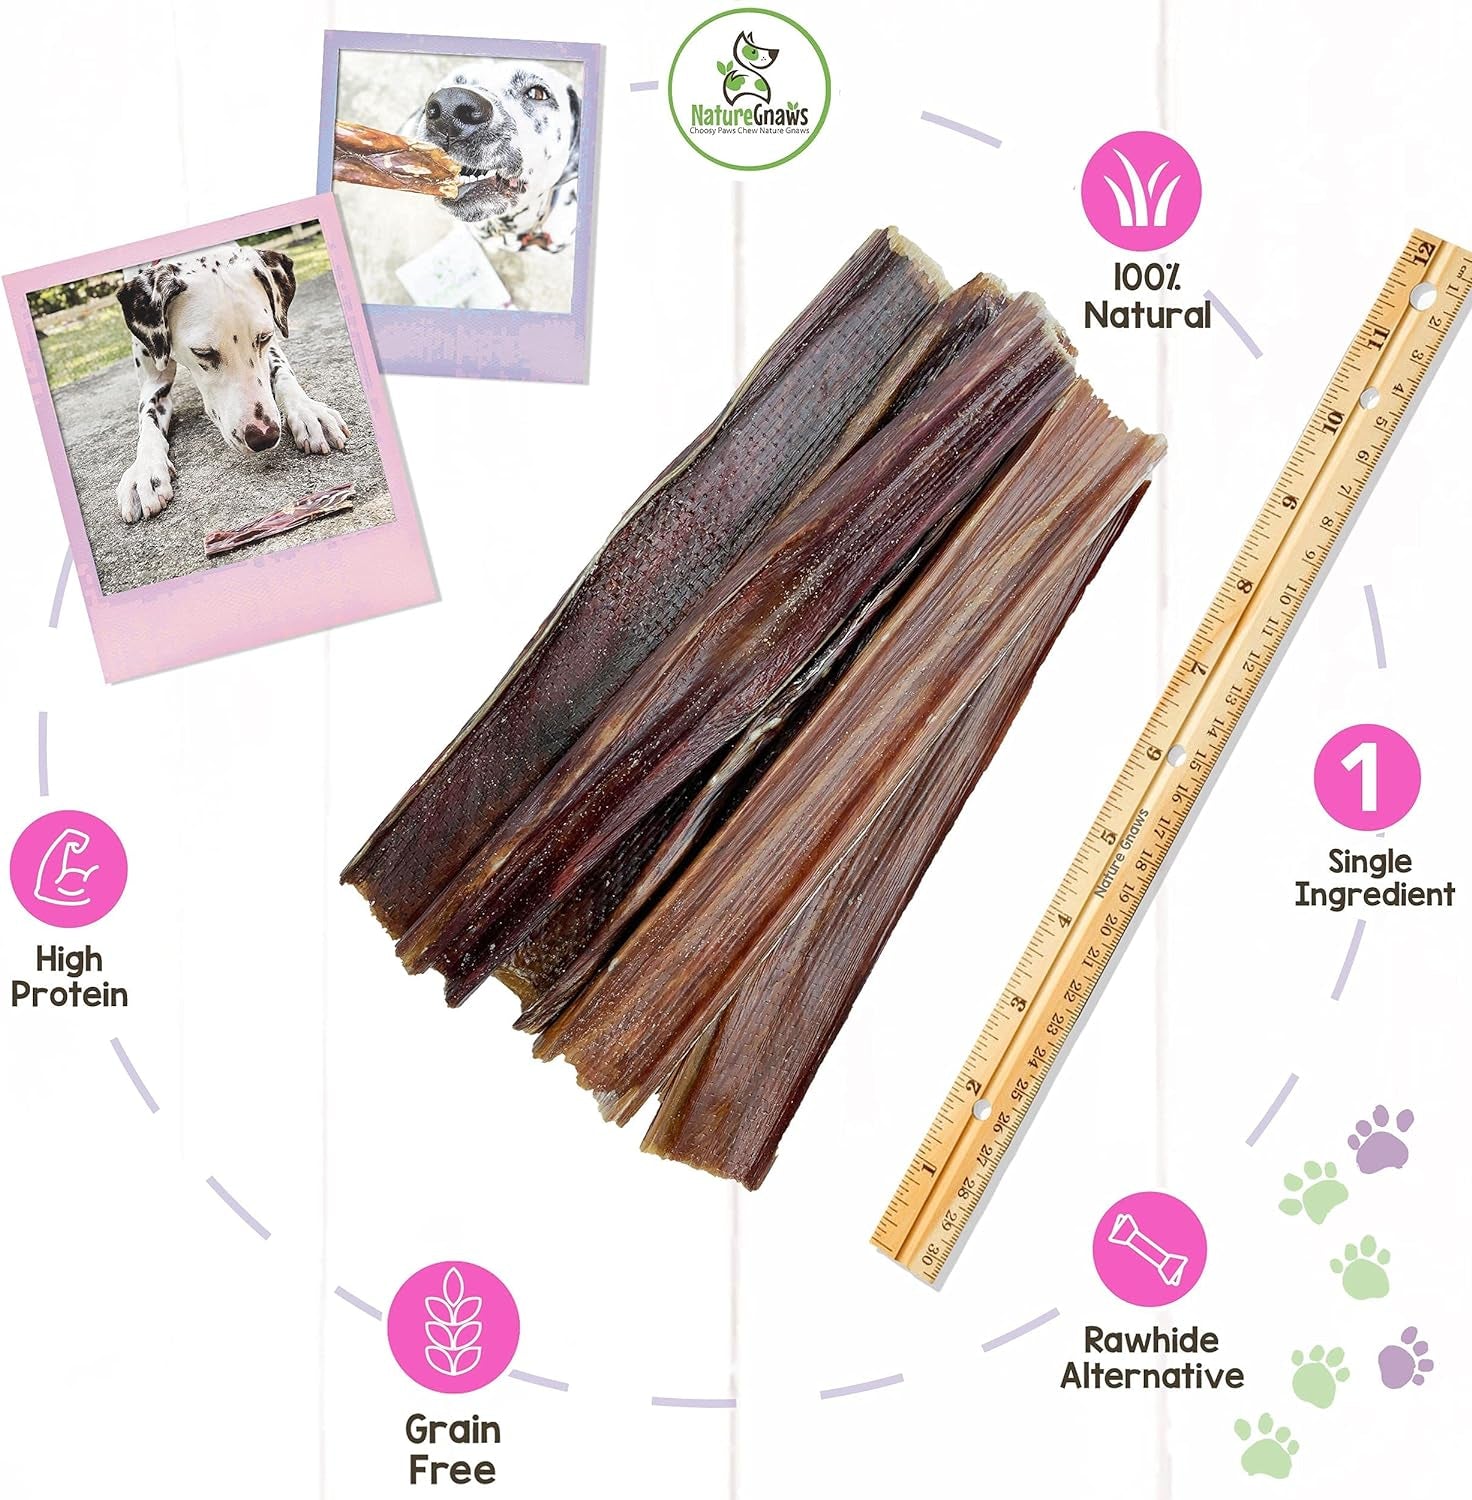 - Beef Jerky Chews for Large Dogs - Premium Natural Beef Gullet Sticks - Simple Single Ingredient Tasty Dog Chew Treats - Rawhide Free 9-10 Inch